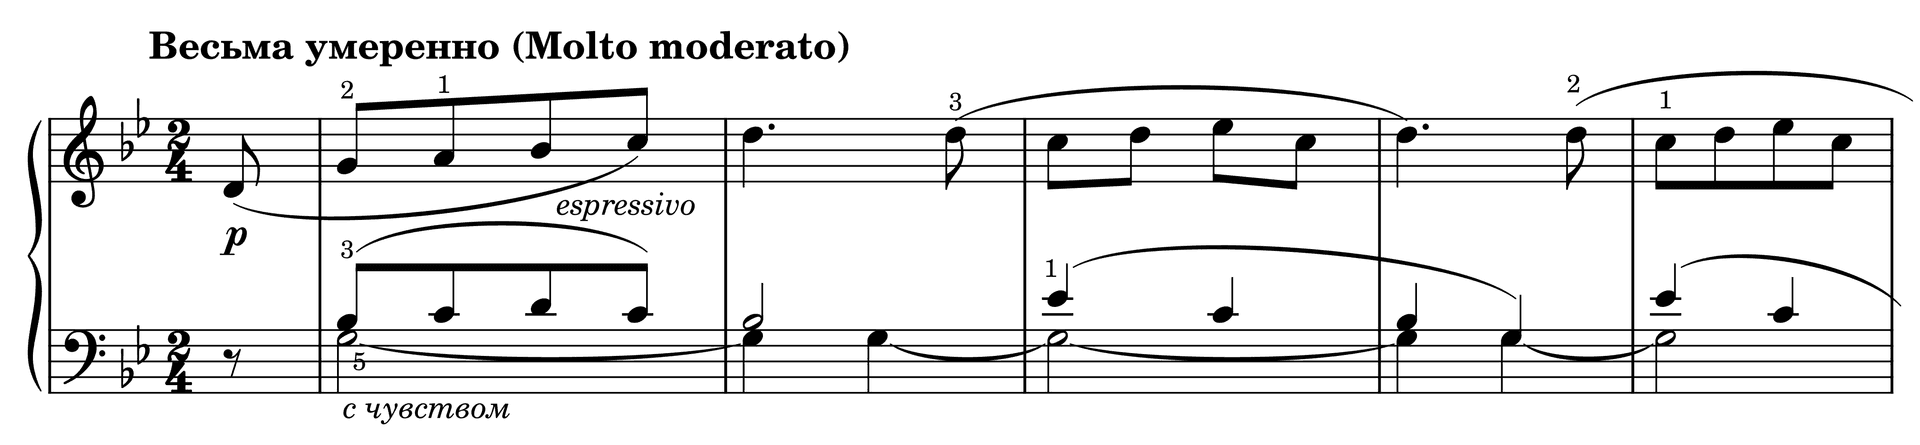 Excerpt of Old French Song Op. 39, No. 16